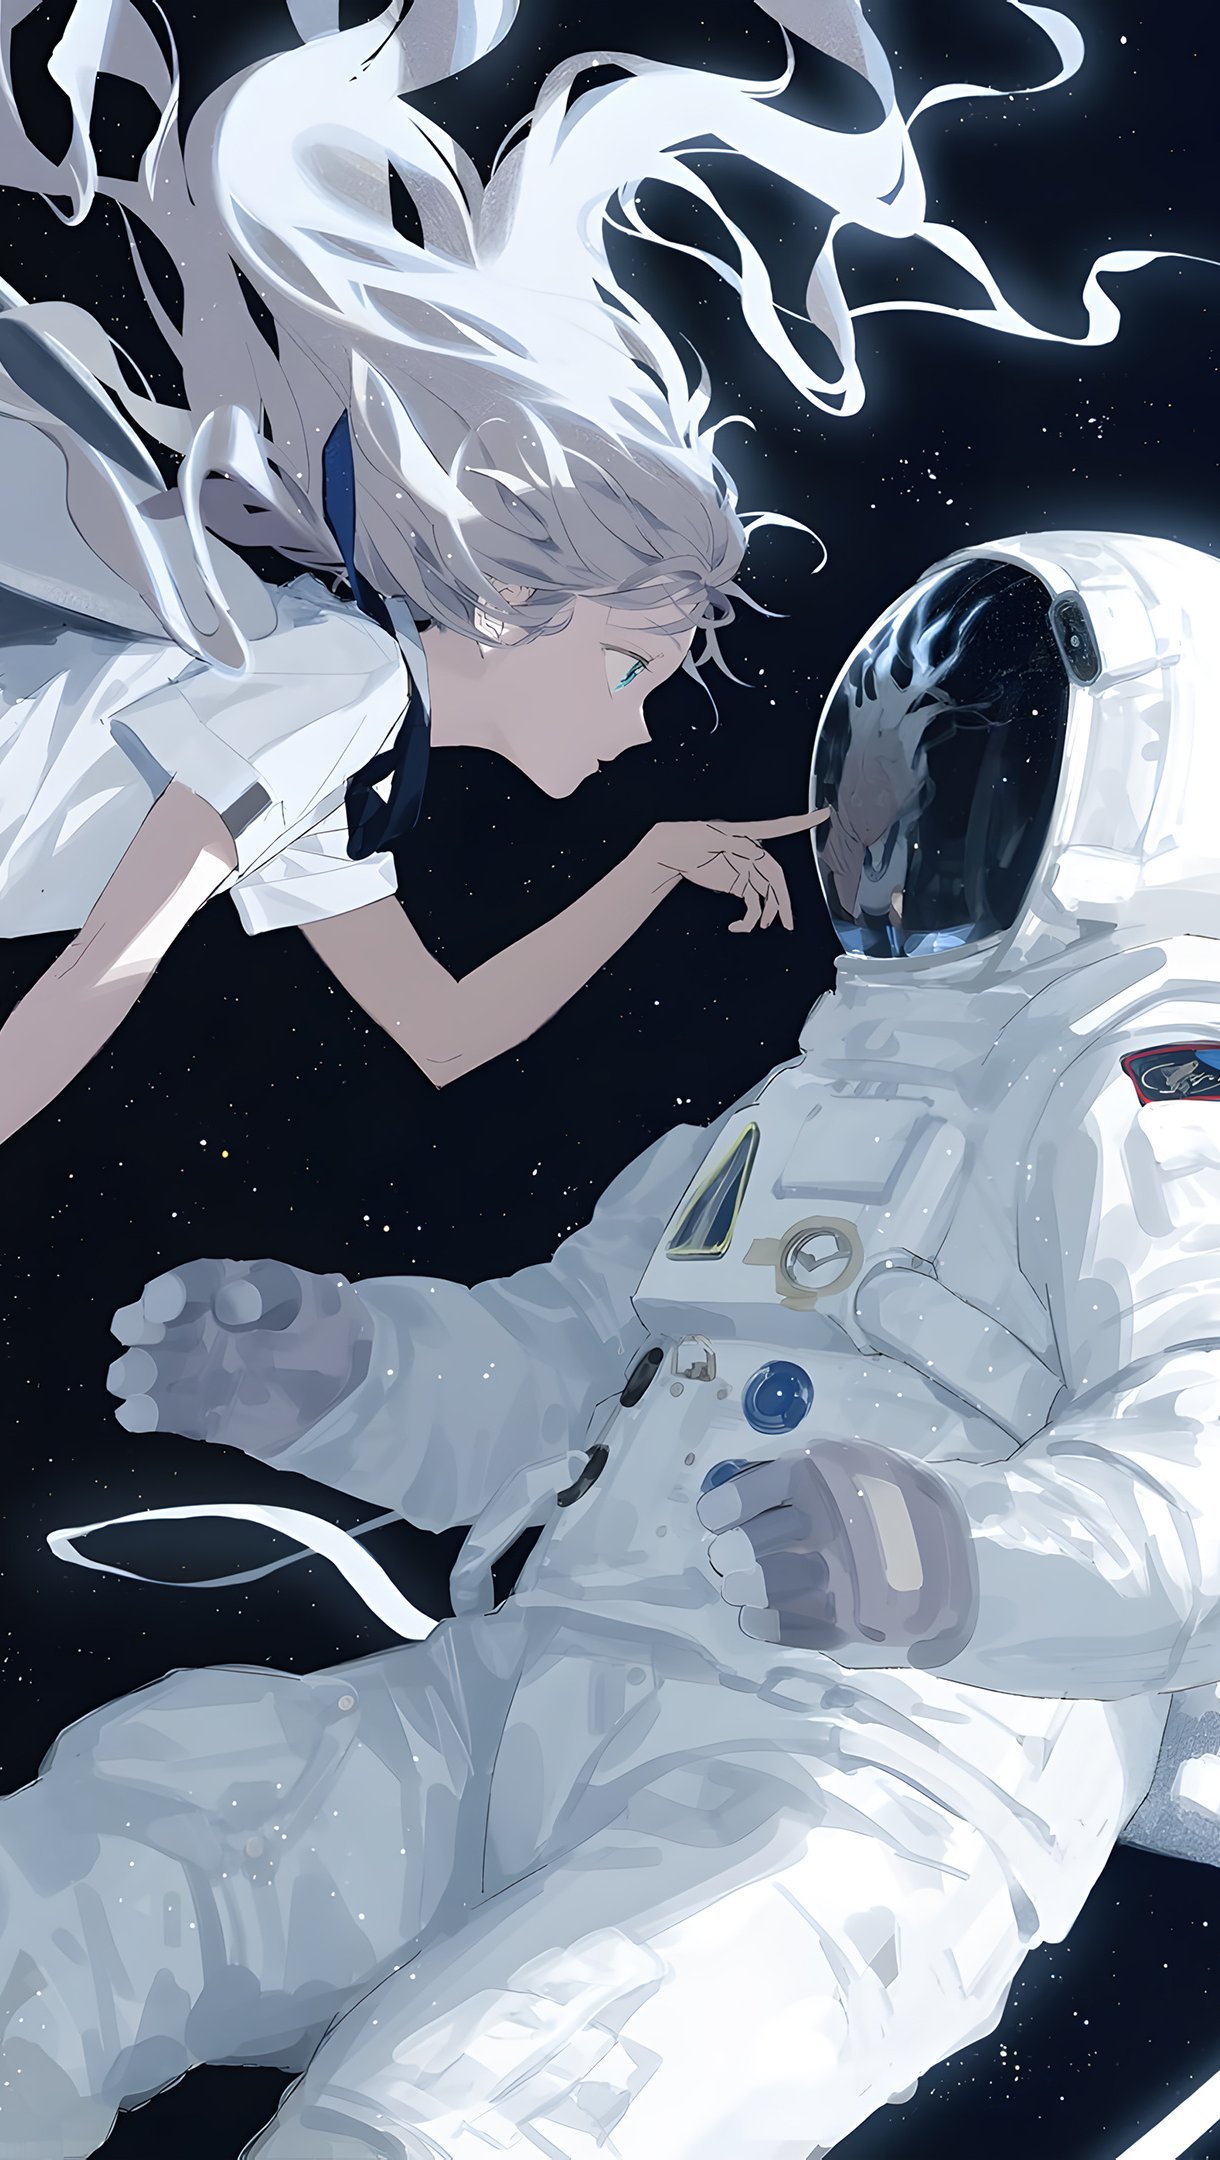 Anime girl with wings and astronaut Wallpaper 4k Ultra HD